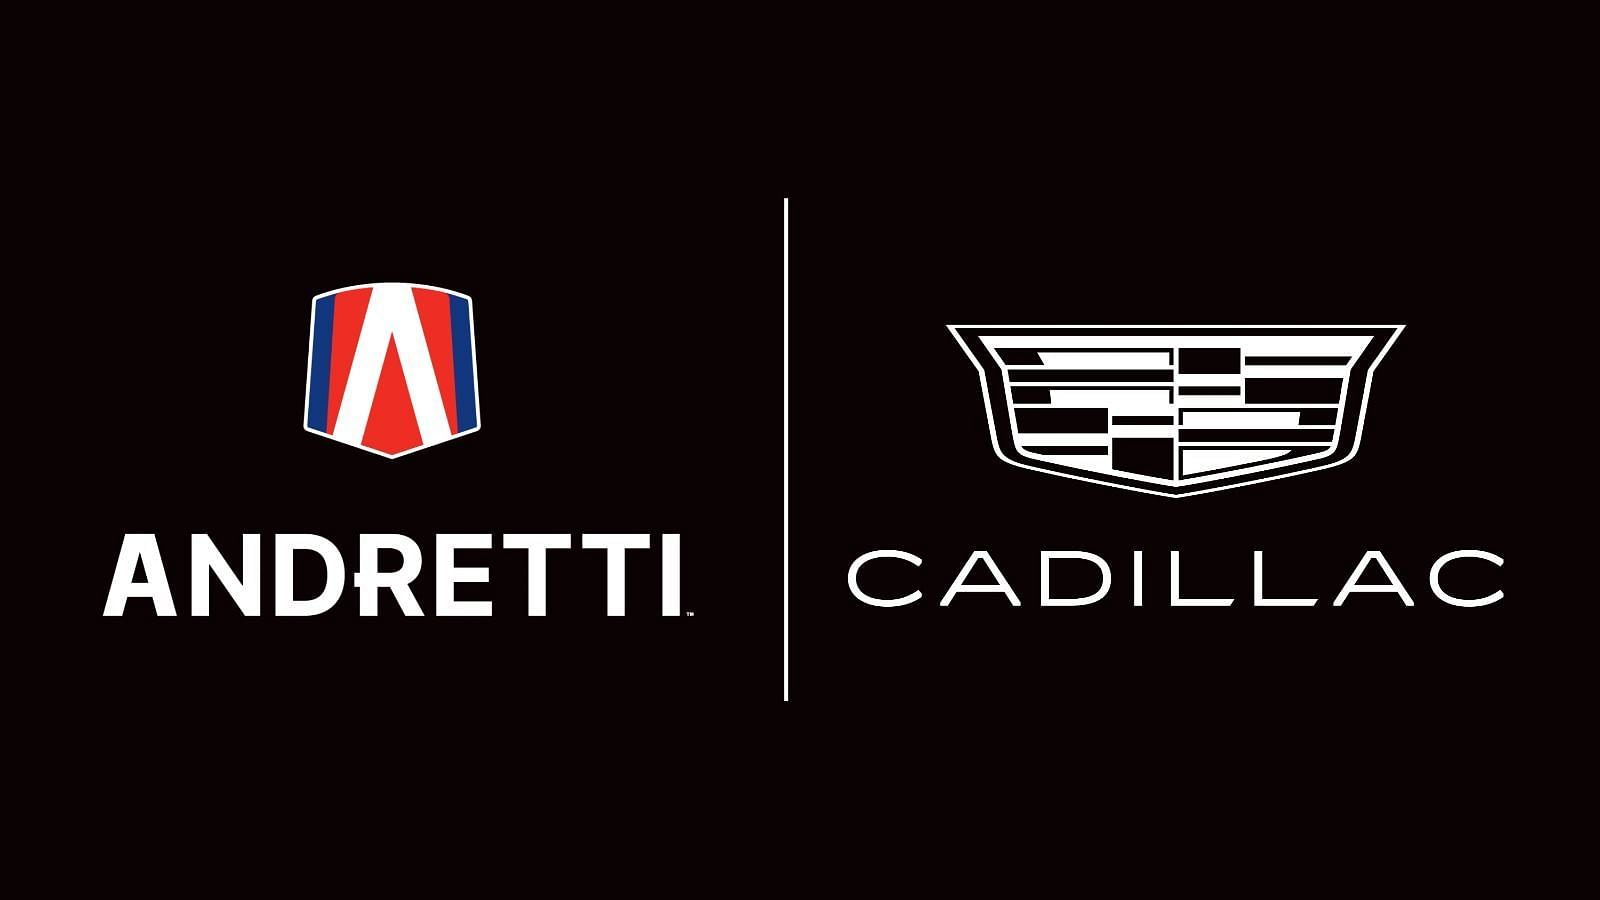 Andretti Global partners with General Motors and Cadillac to strengthen F1 bid